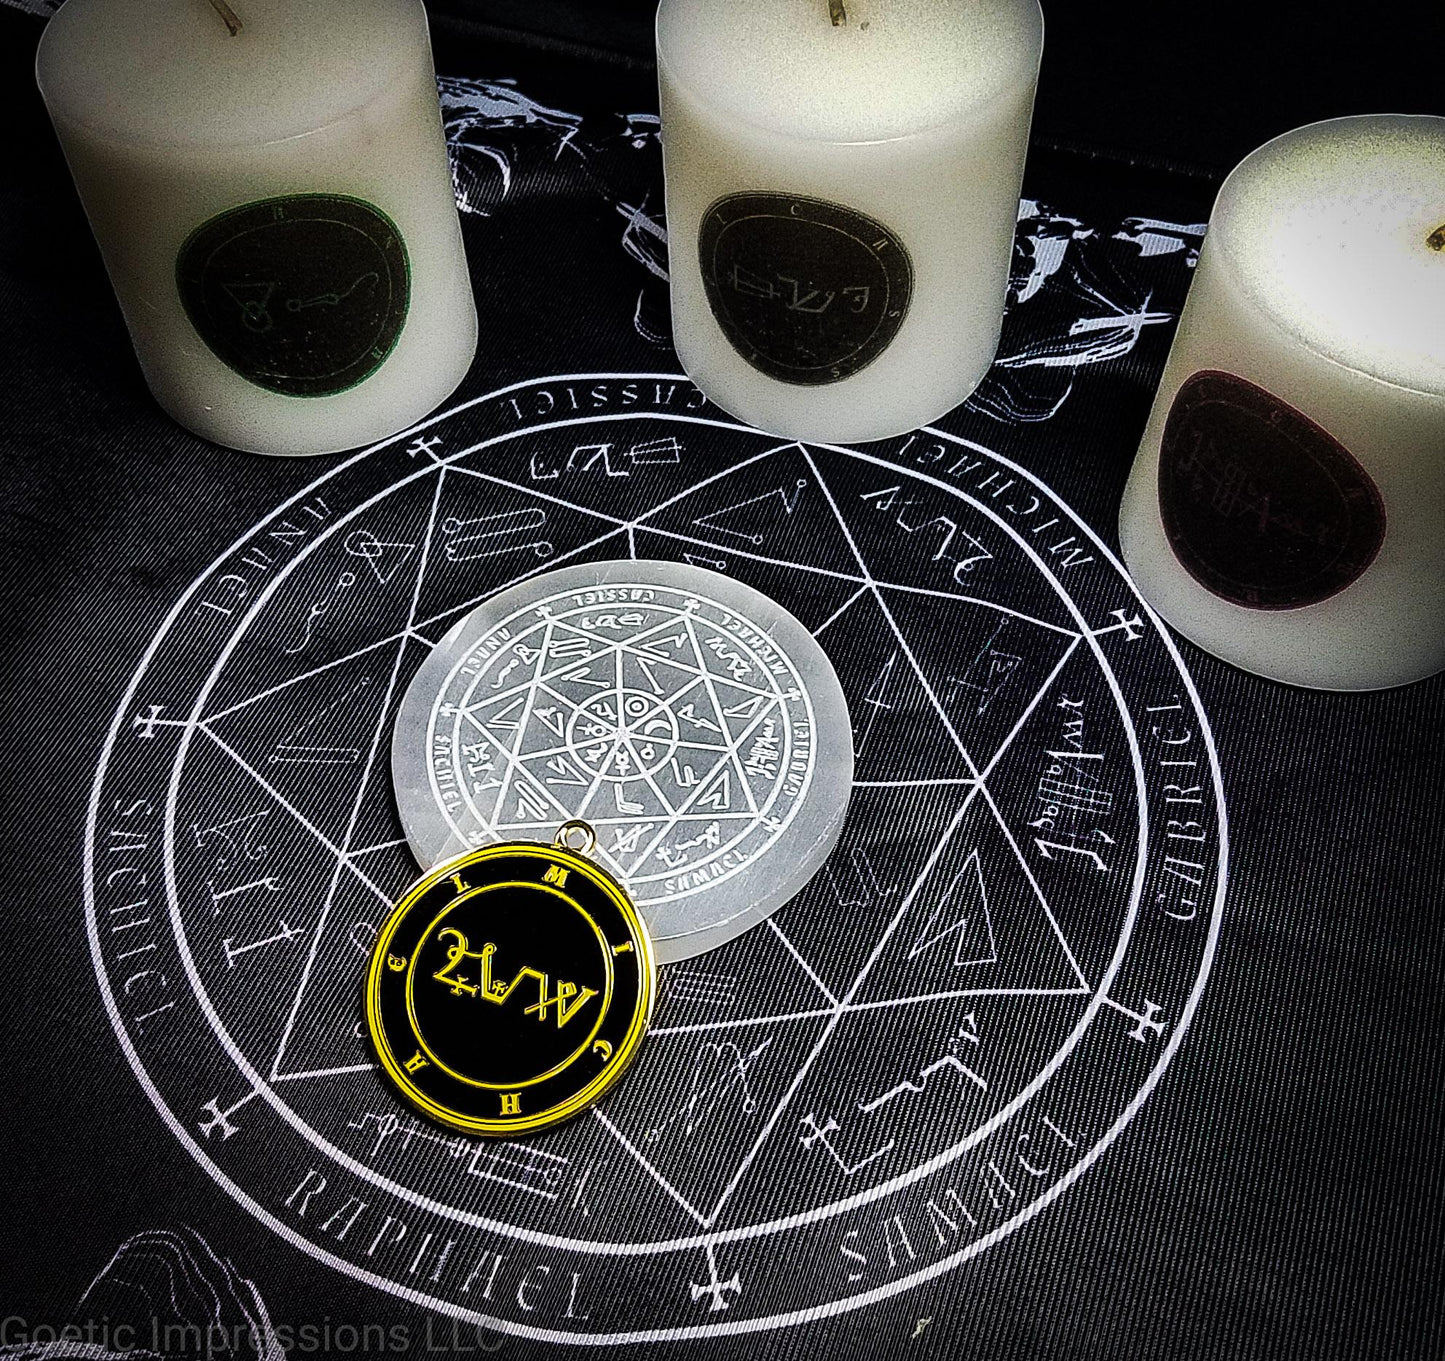 A black and white altar cloth with a seal of the planetary Archangels in the center. The seal contains various astrological sigils. There are candles and other ritual tools on the cloth.